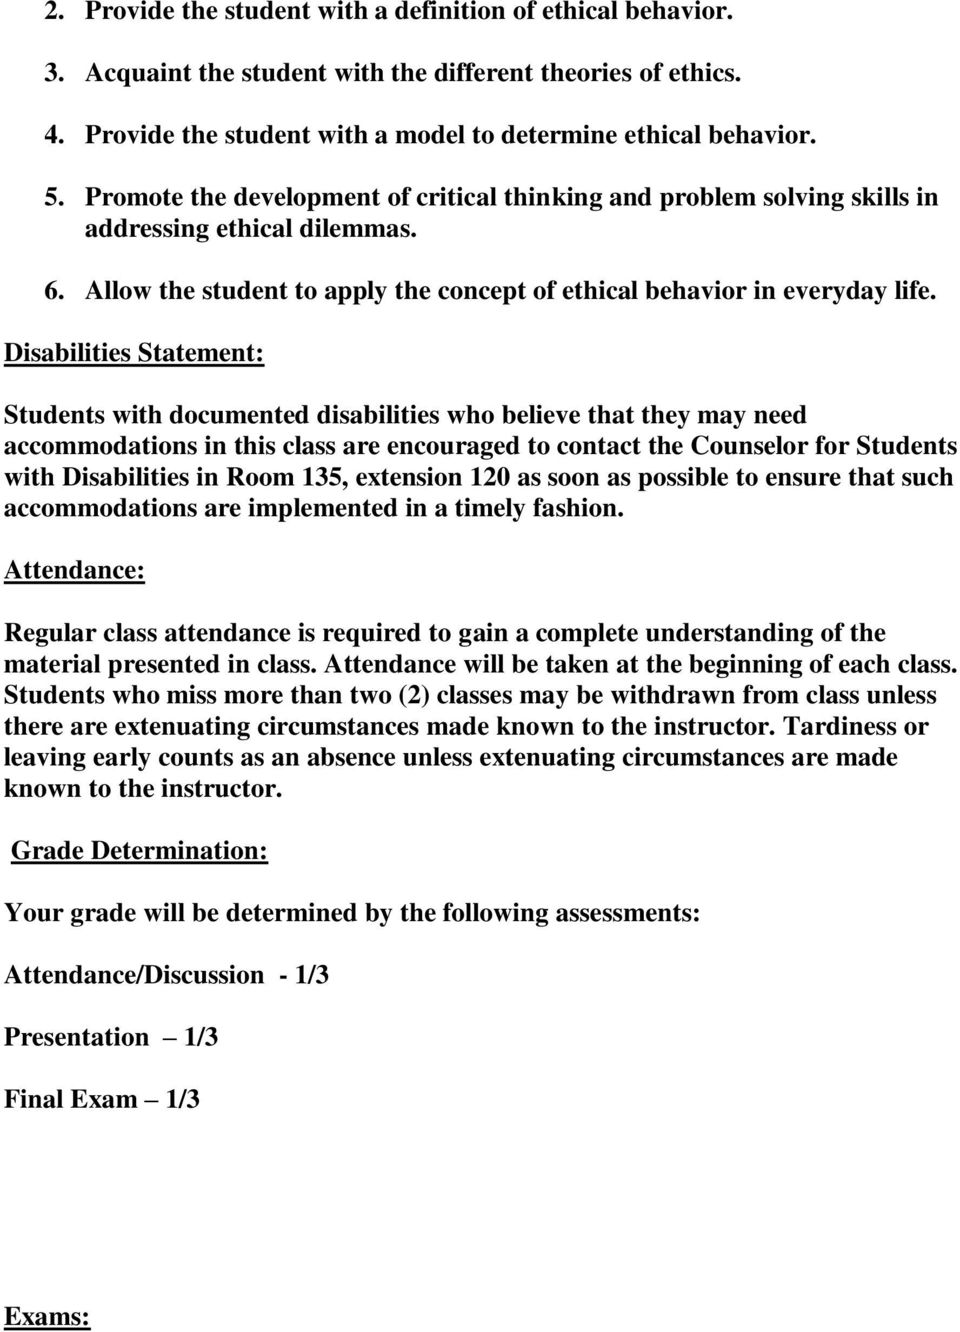 Disabilities Statement: Students with documented disabilities who believe that they may need accommodations in this class are encouraged to contact the Counselor for Students with Disabilities in